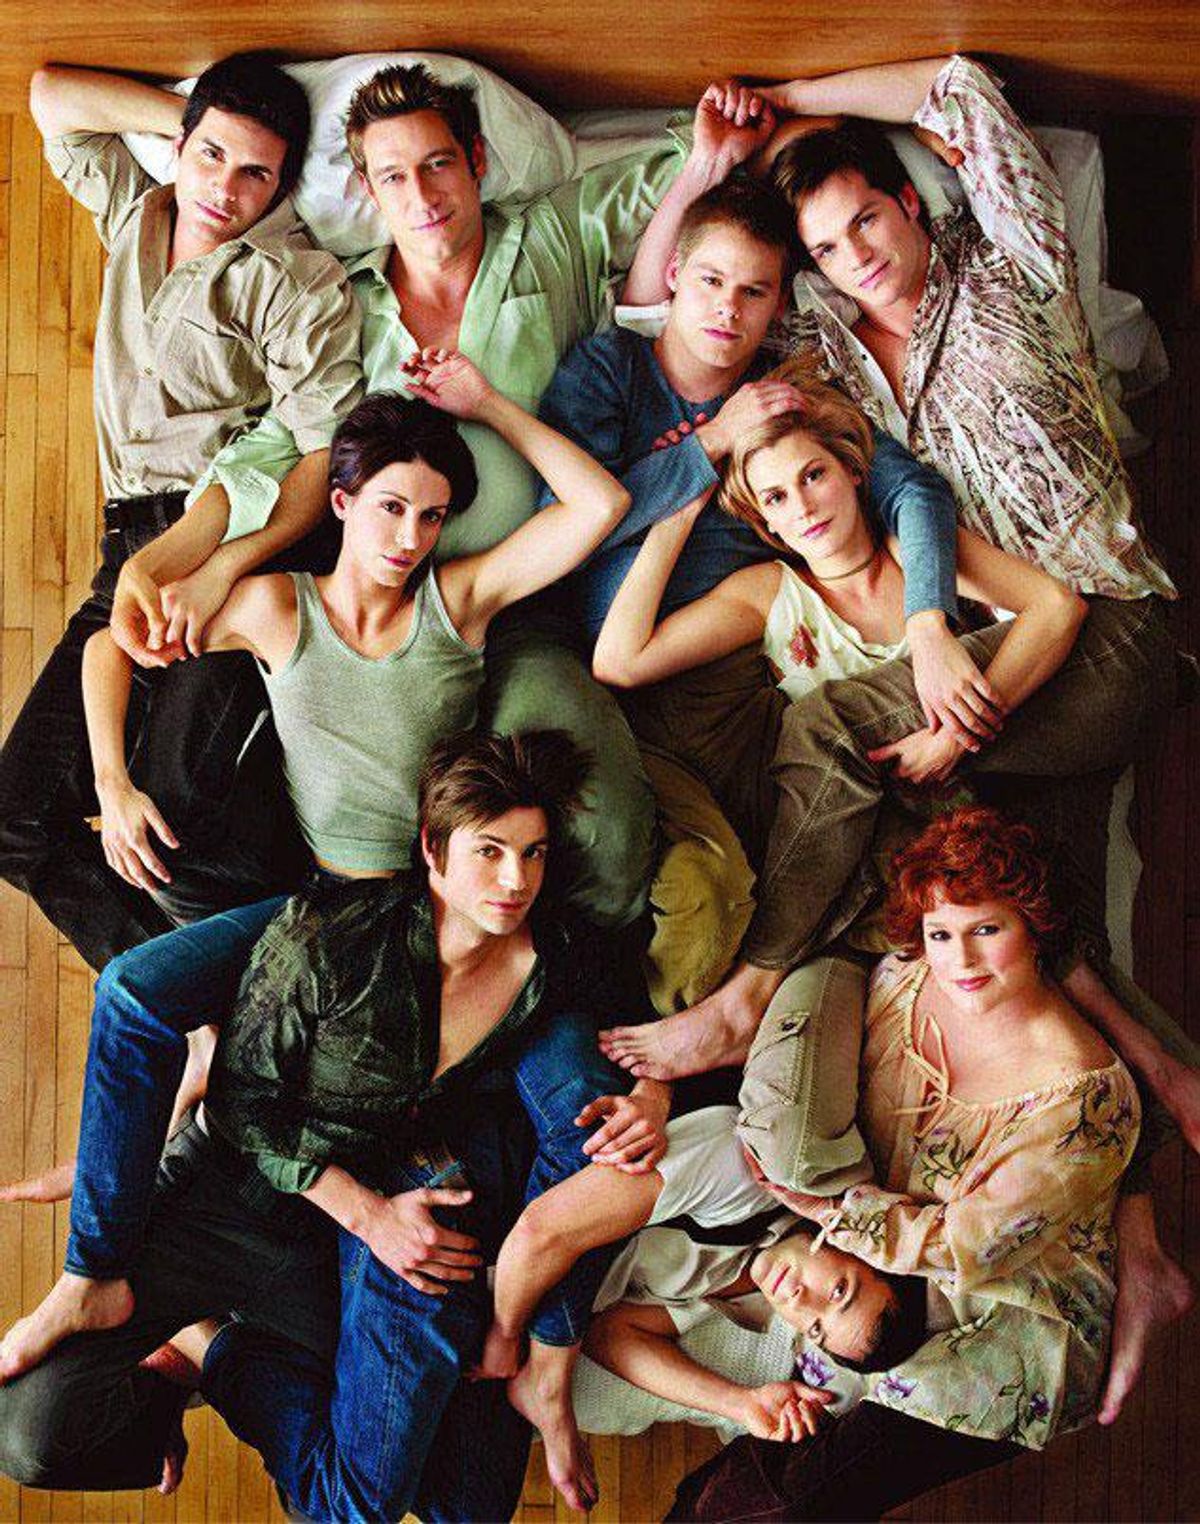 Queer as Folk' — Where Are They Now?